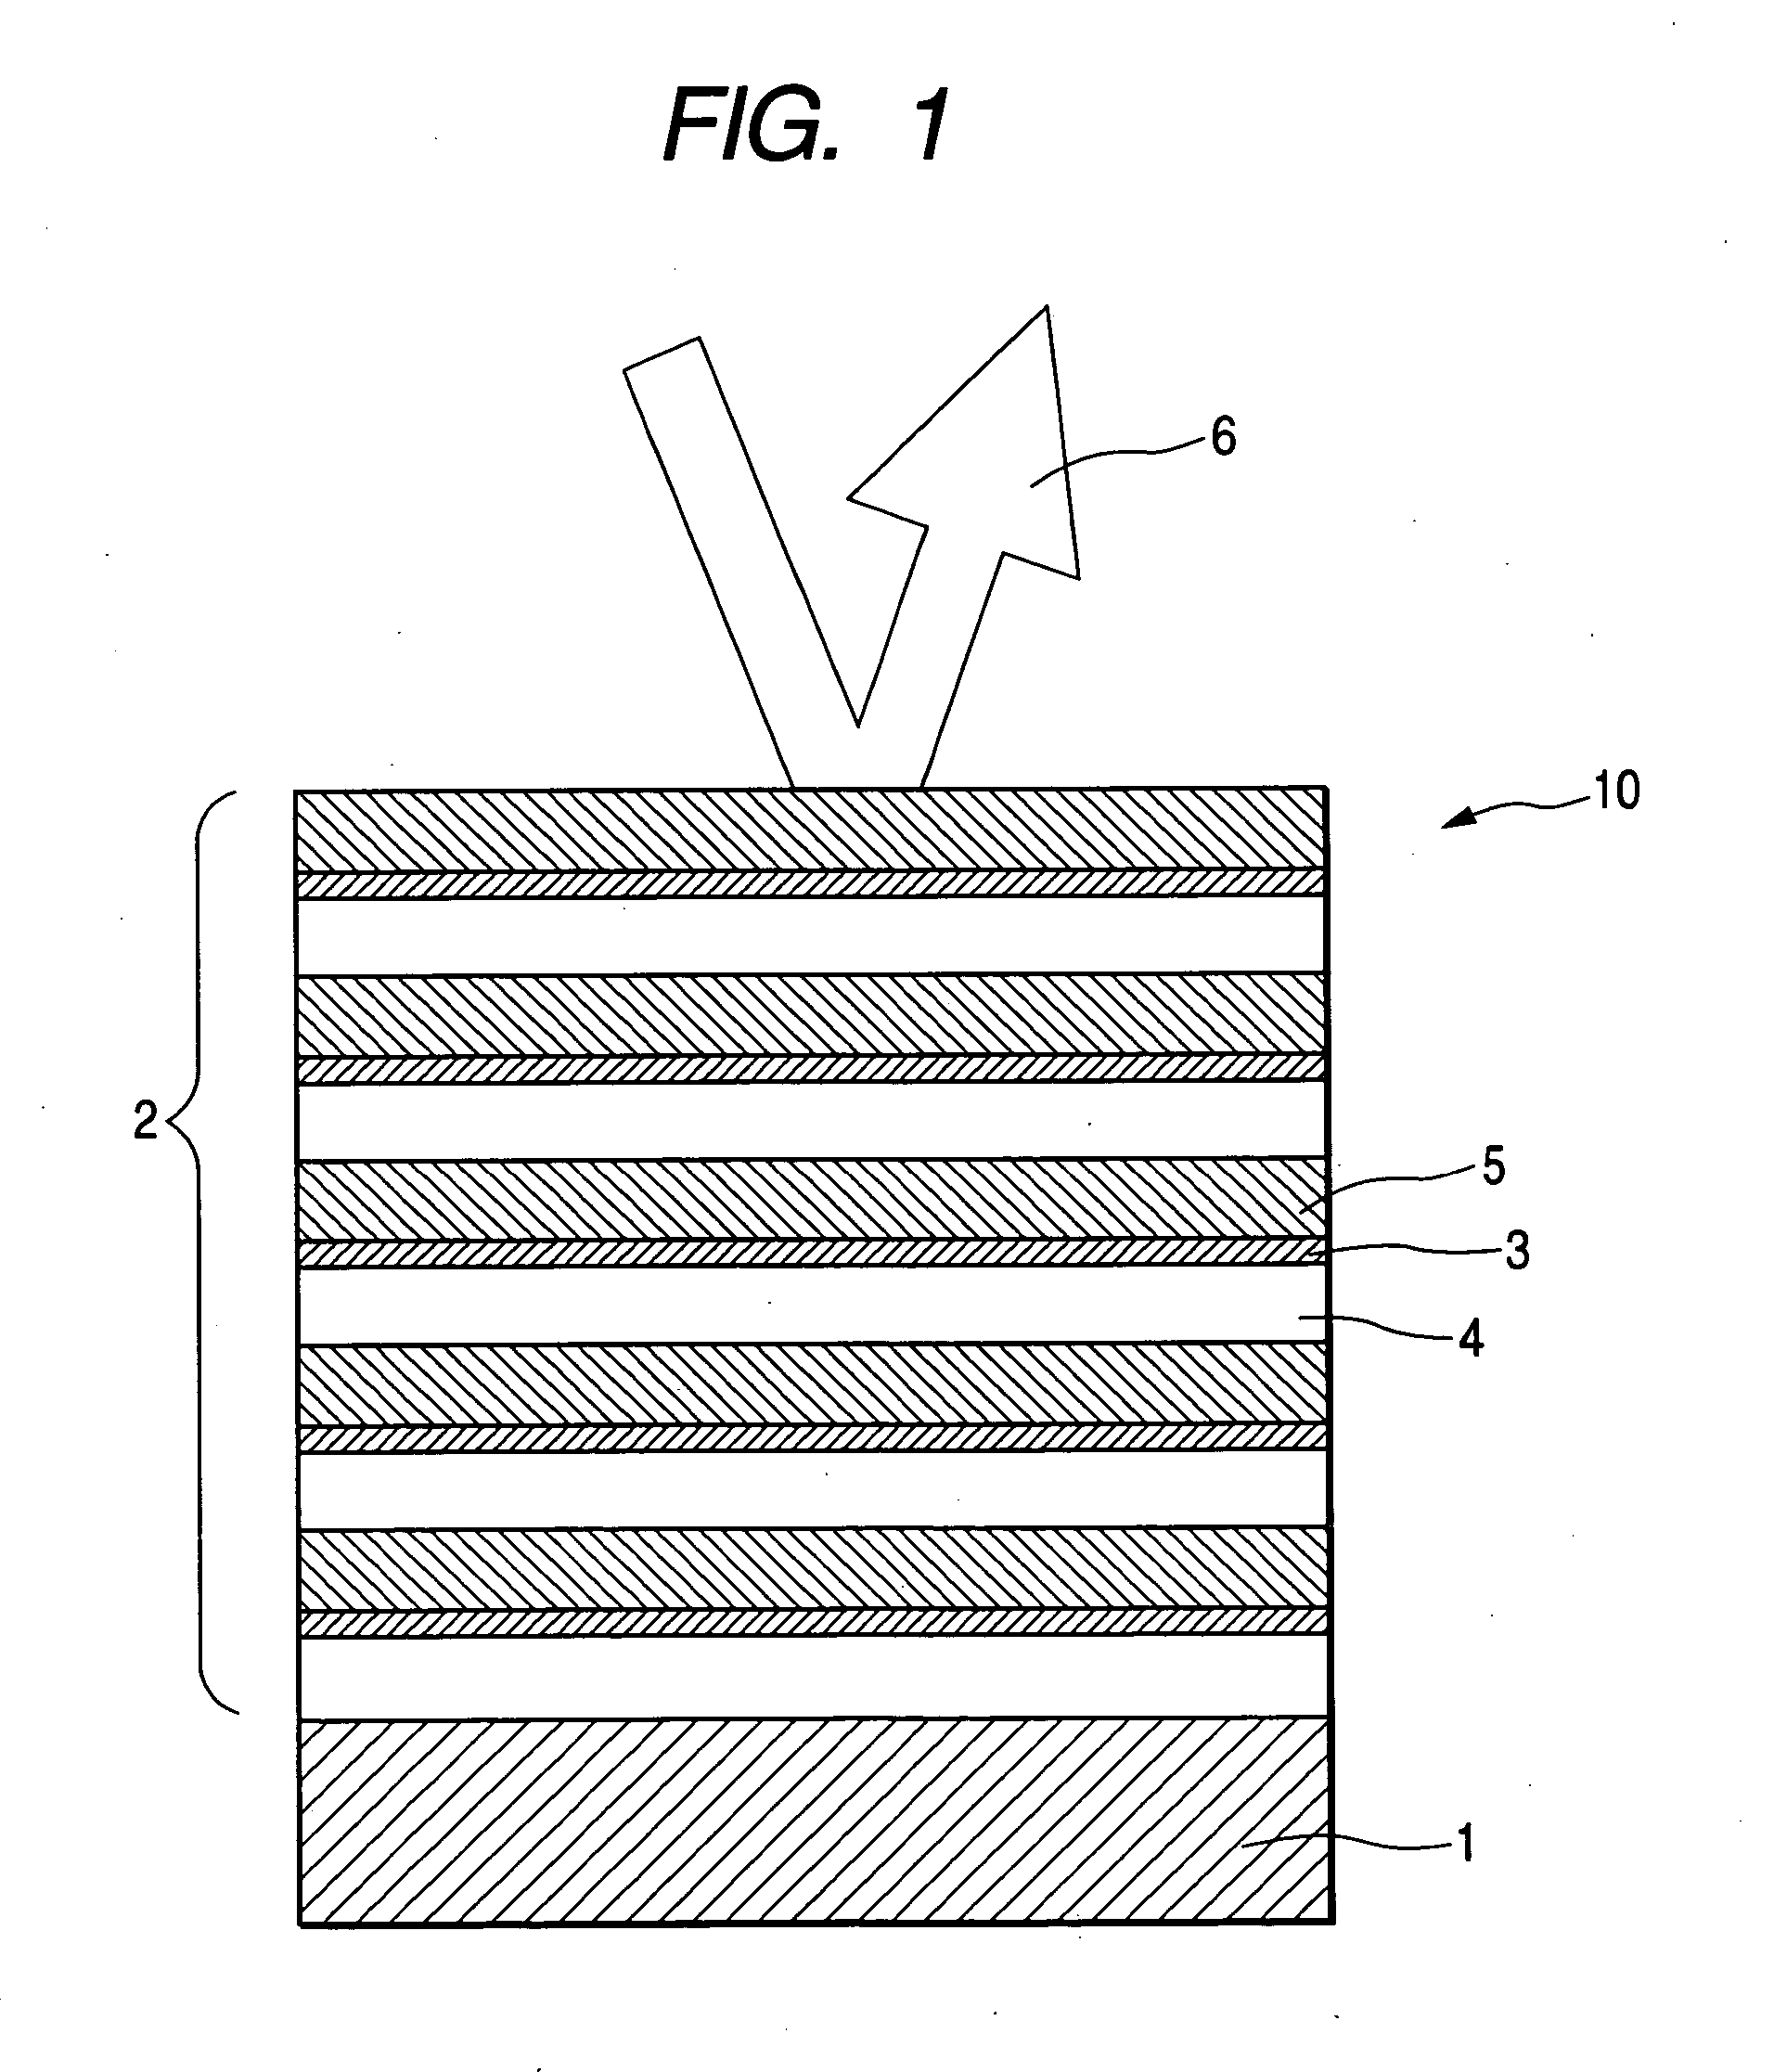 Multilayer film reflector for soft X-rays and manufacturing method thereof